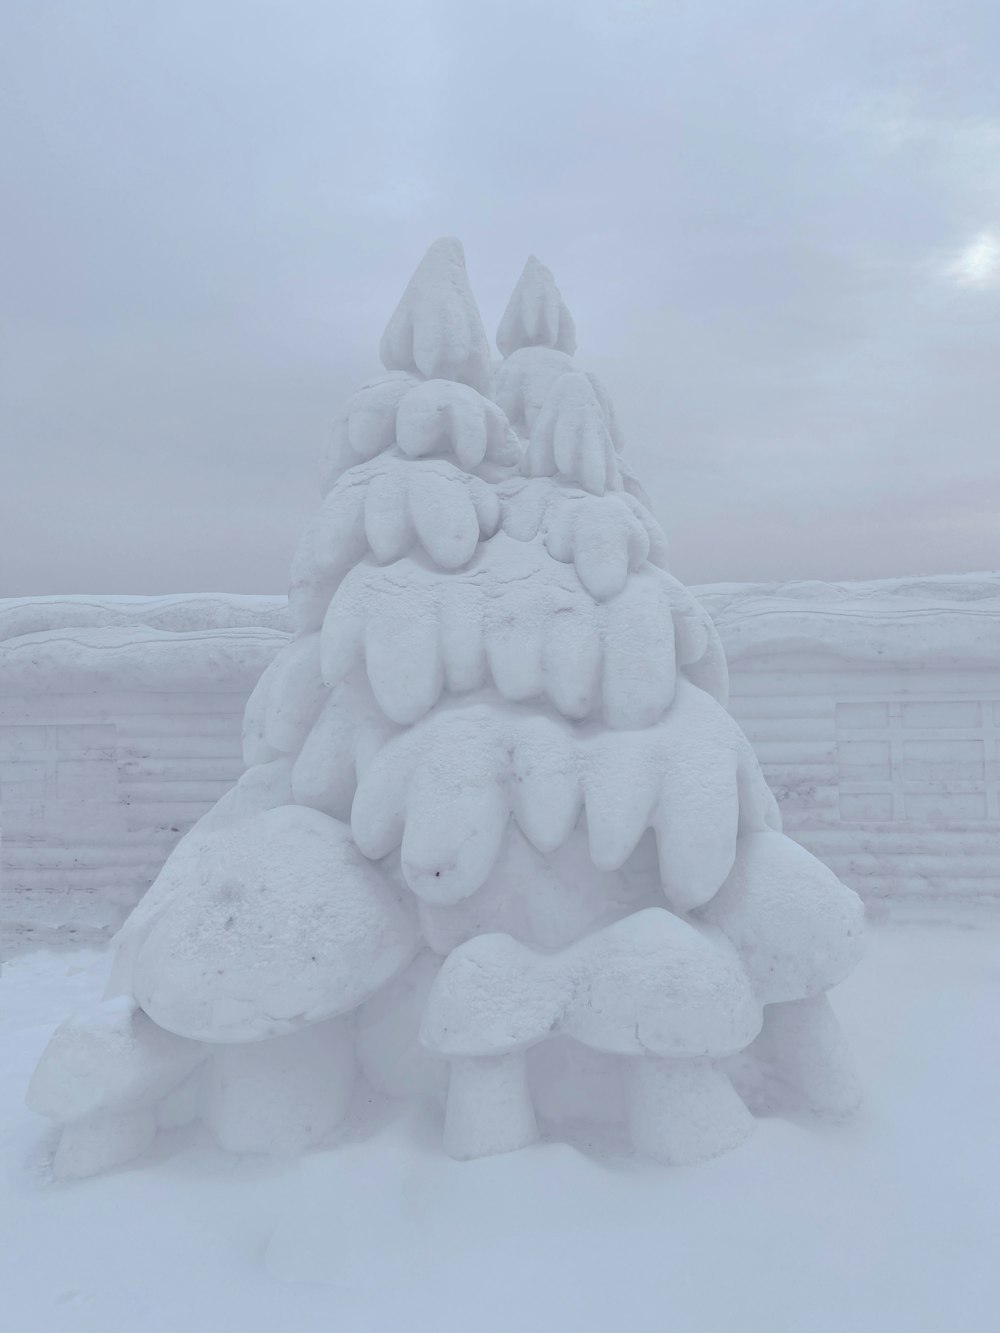 a snow sculpture of a tree made of snow